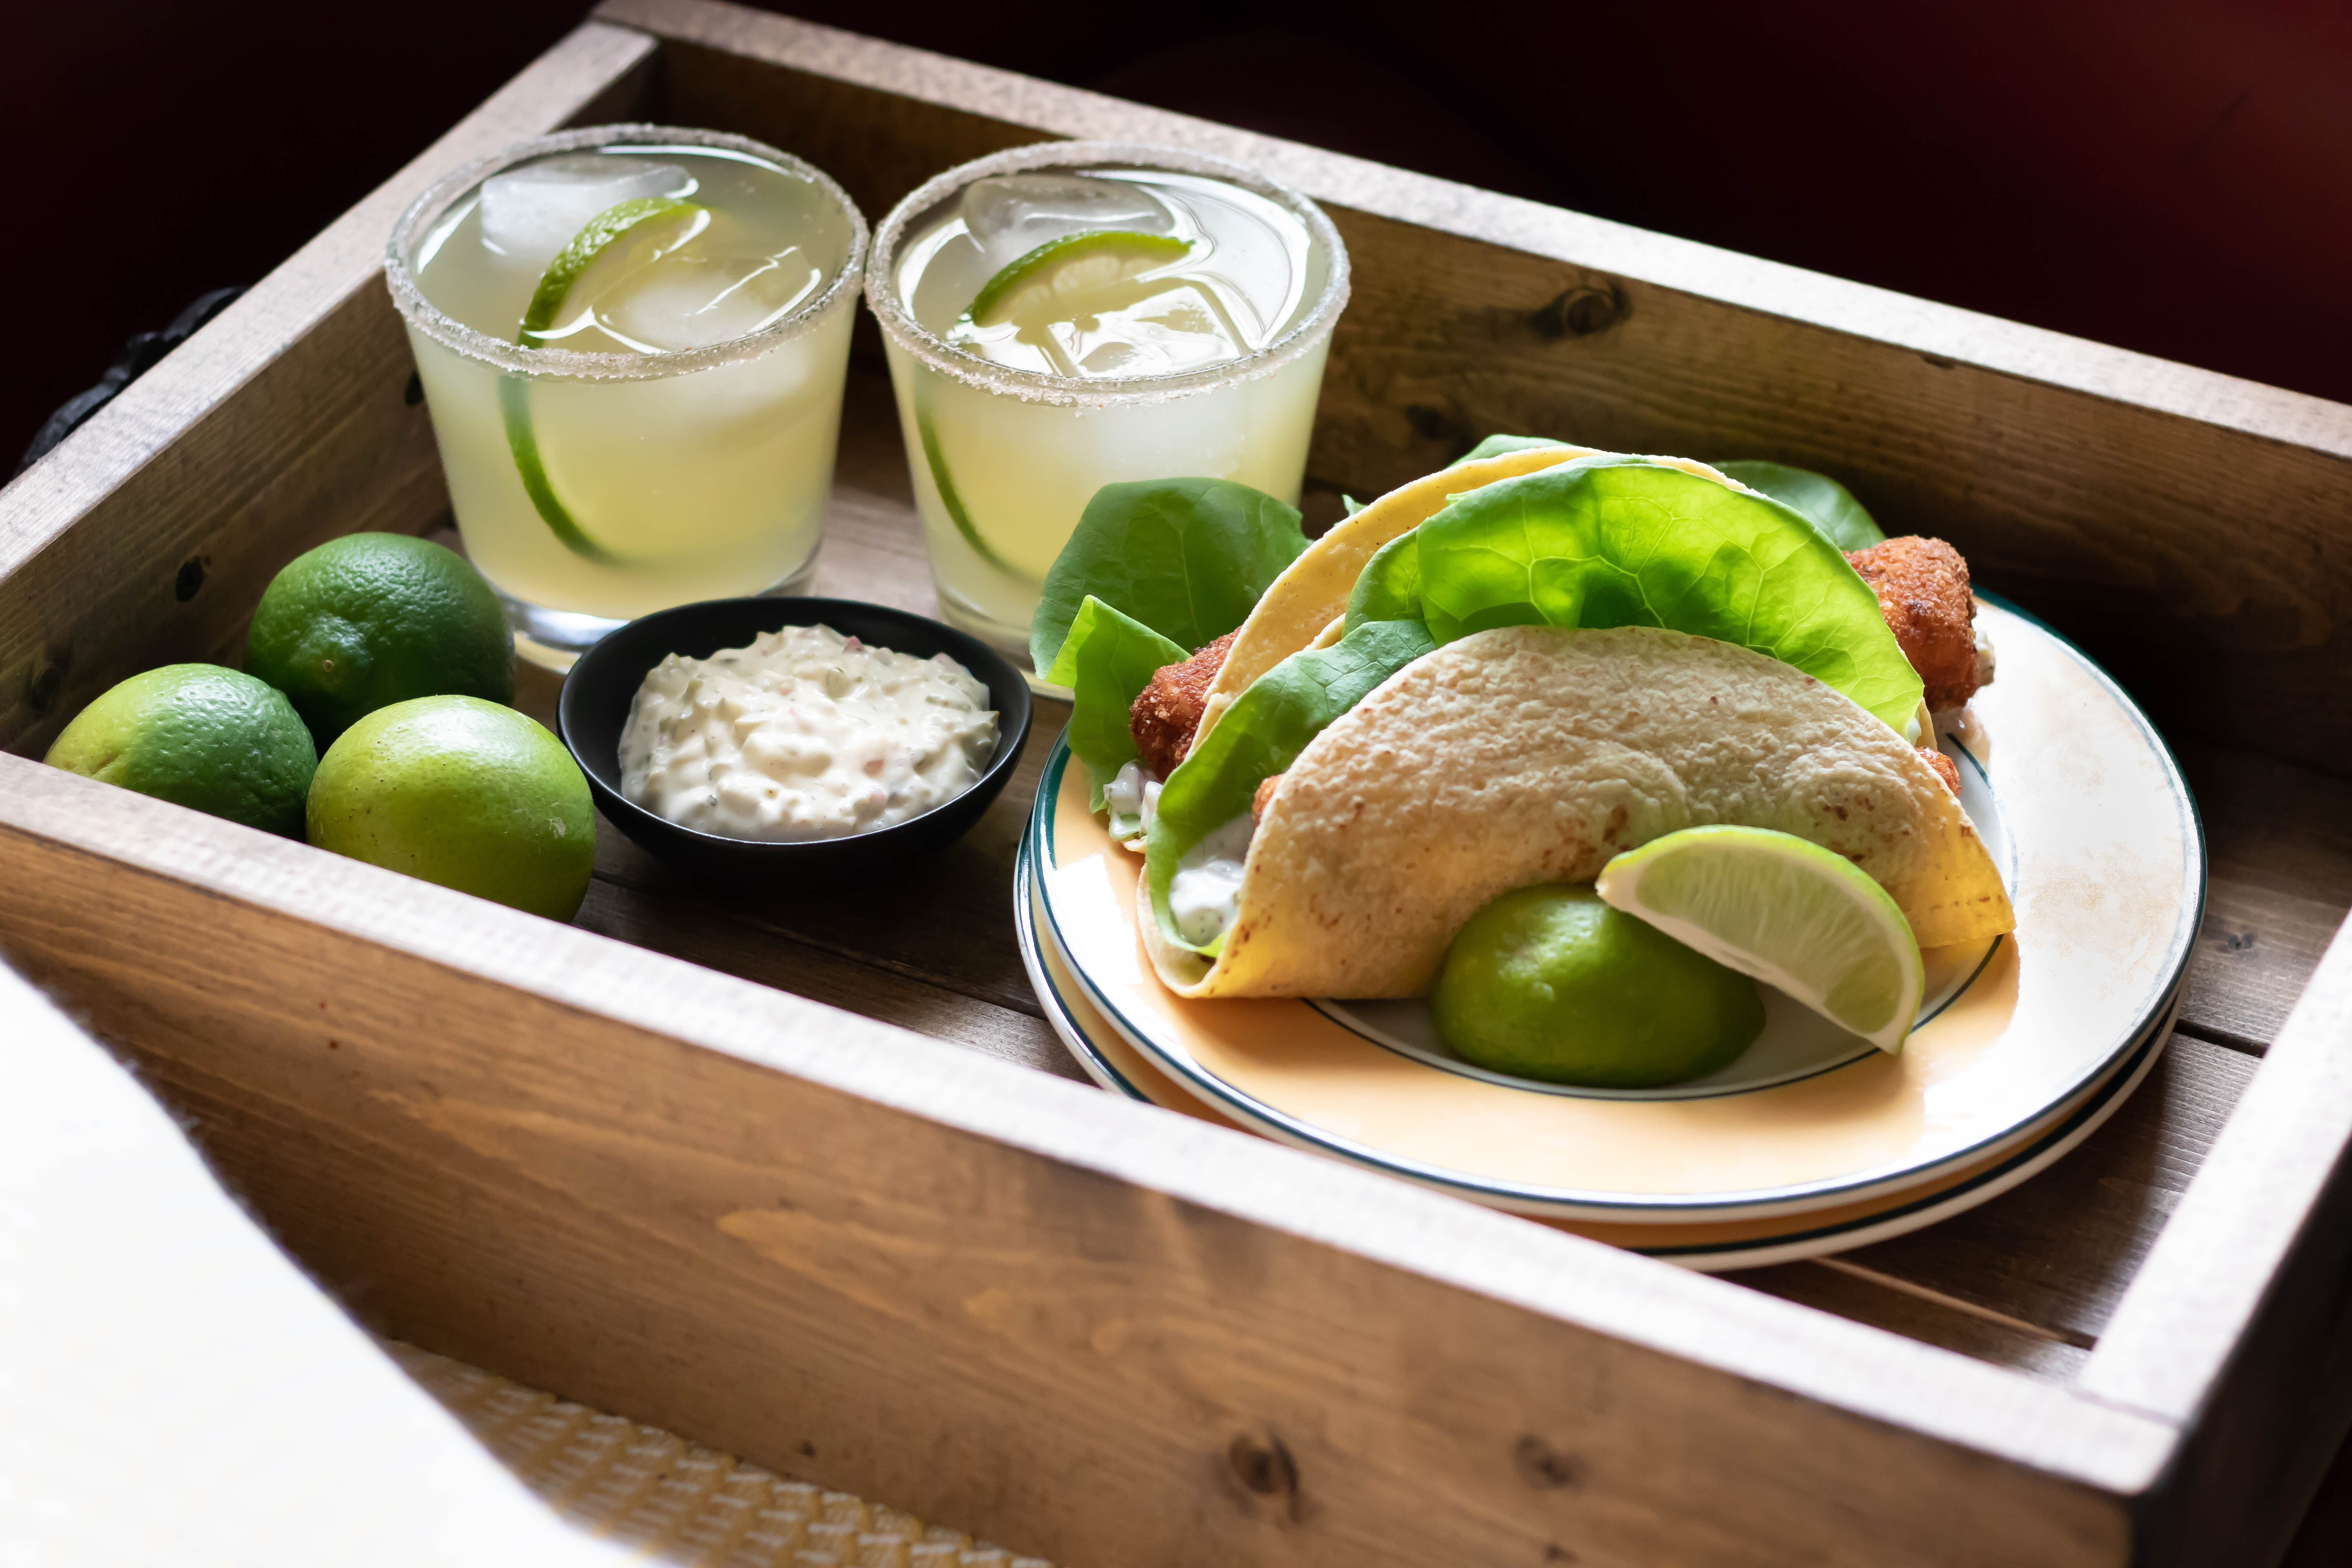 Fish tacos on an Angle in a tray